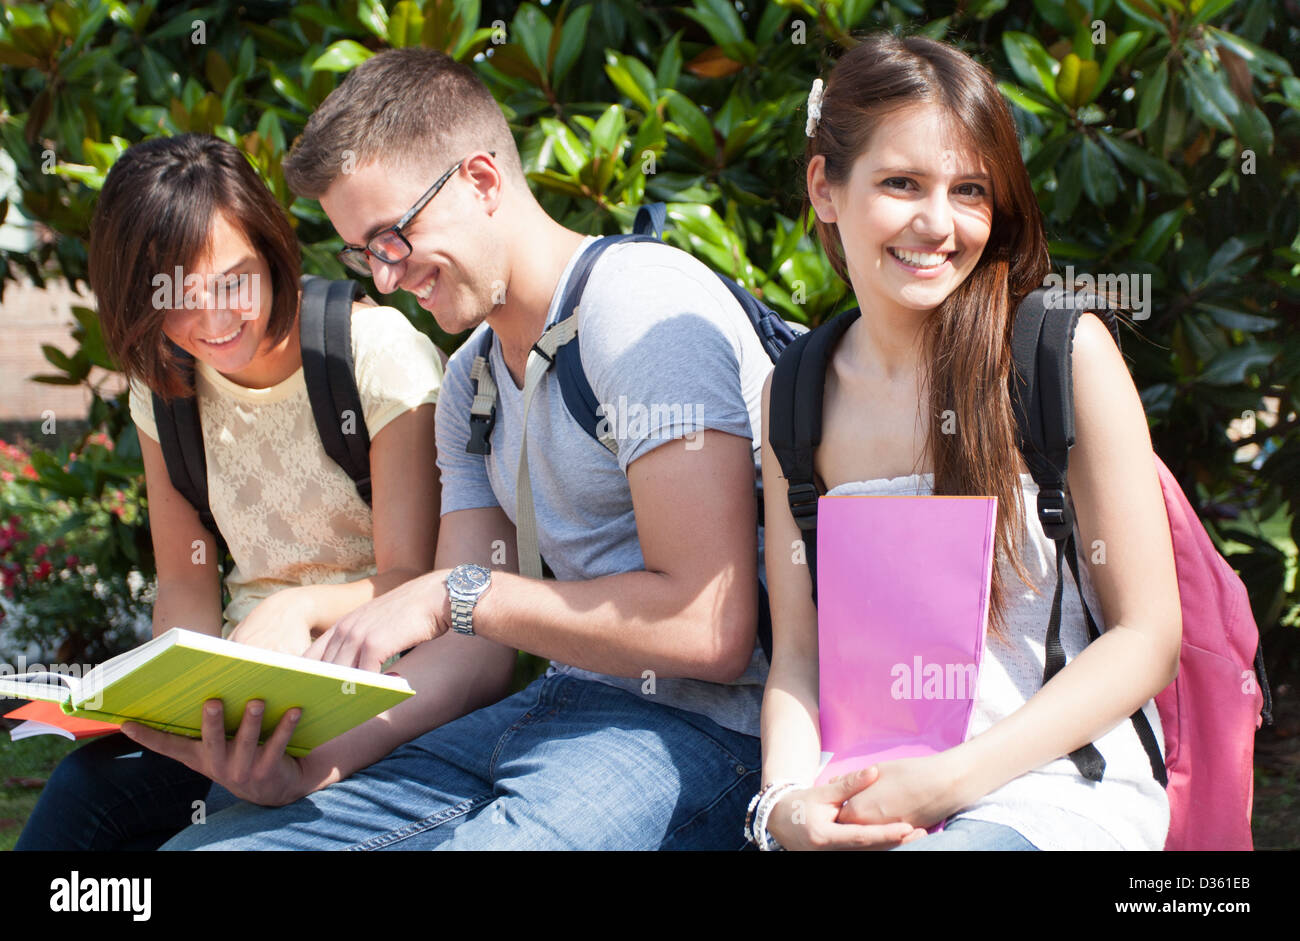 Portrait of a group of students Stock Photo